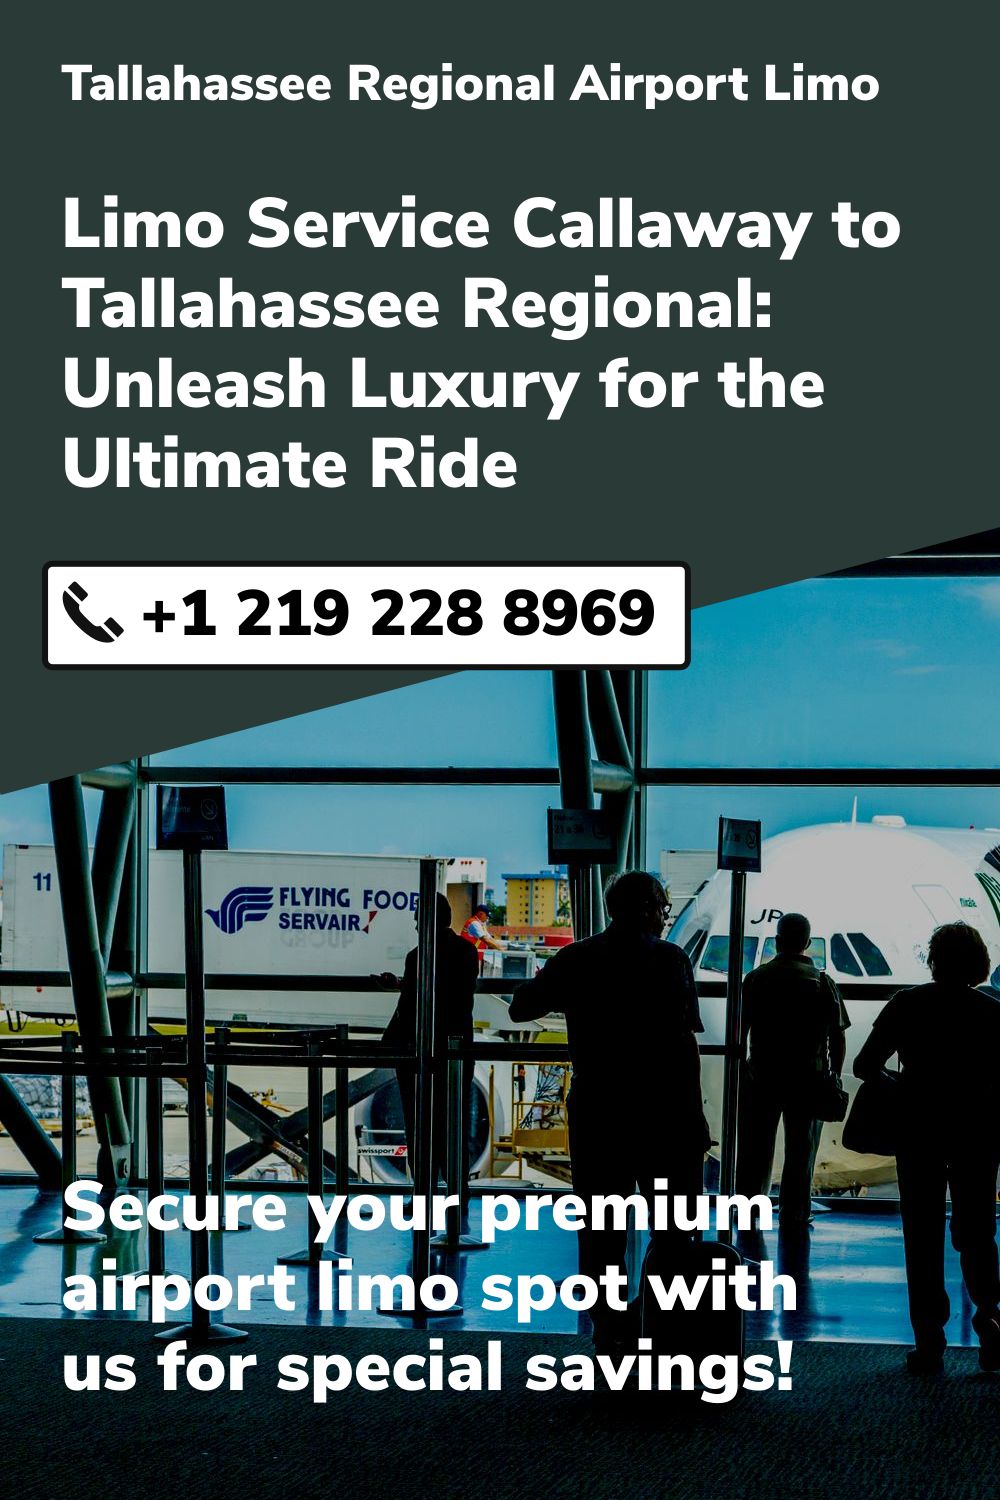 Tallahassee Regional Airport Limo